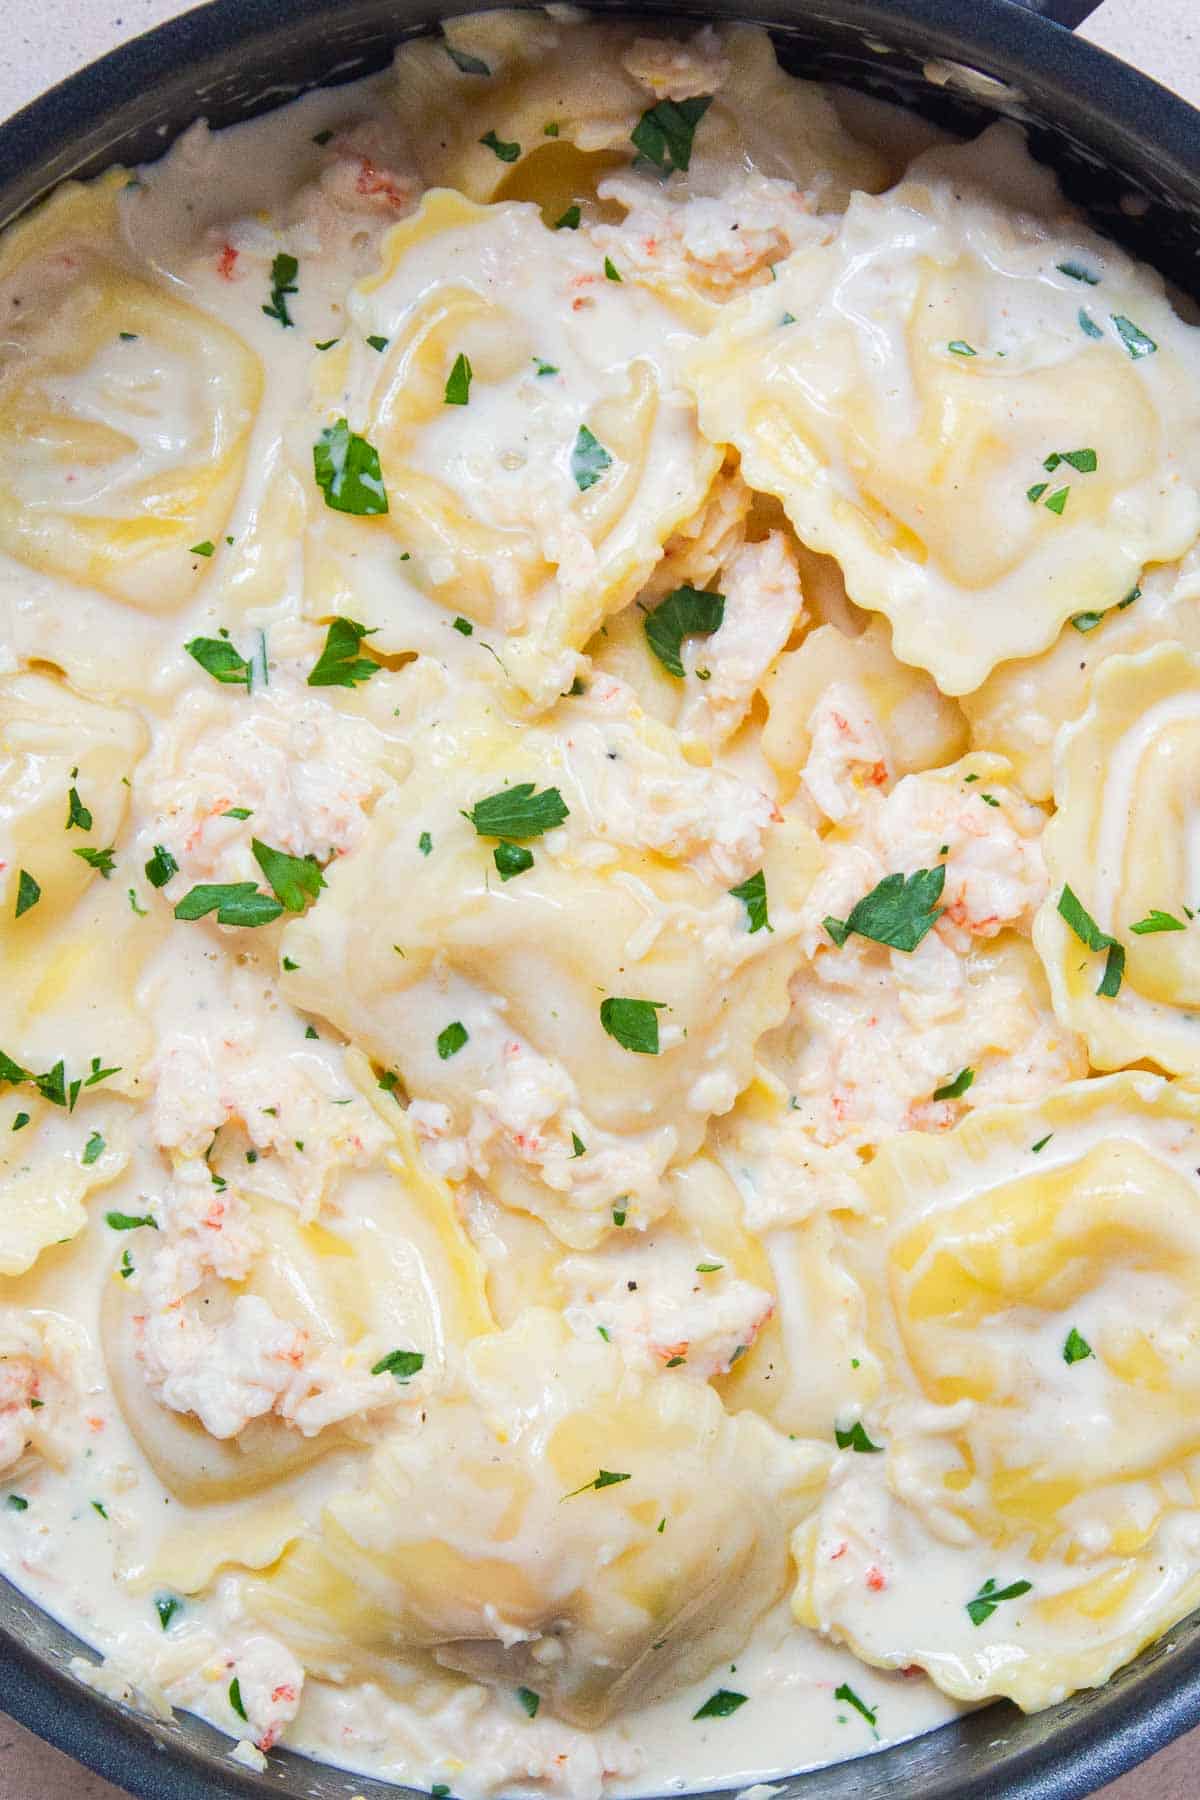 Lobster ravioli in a creamy white wine sauce garnished with fresh parsley